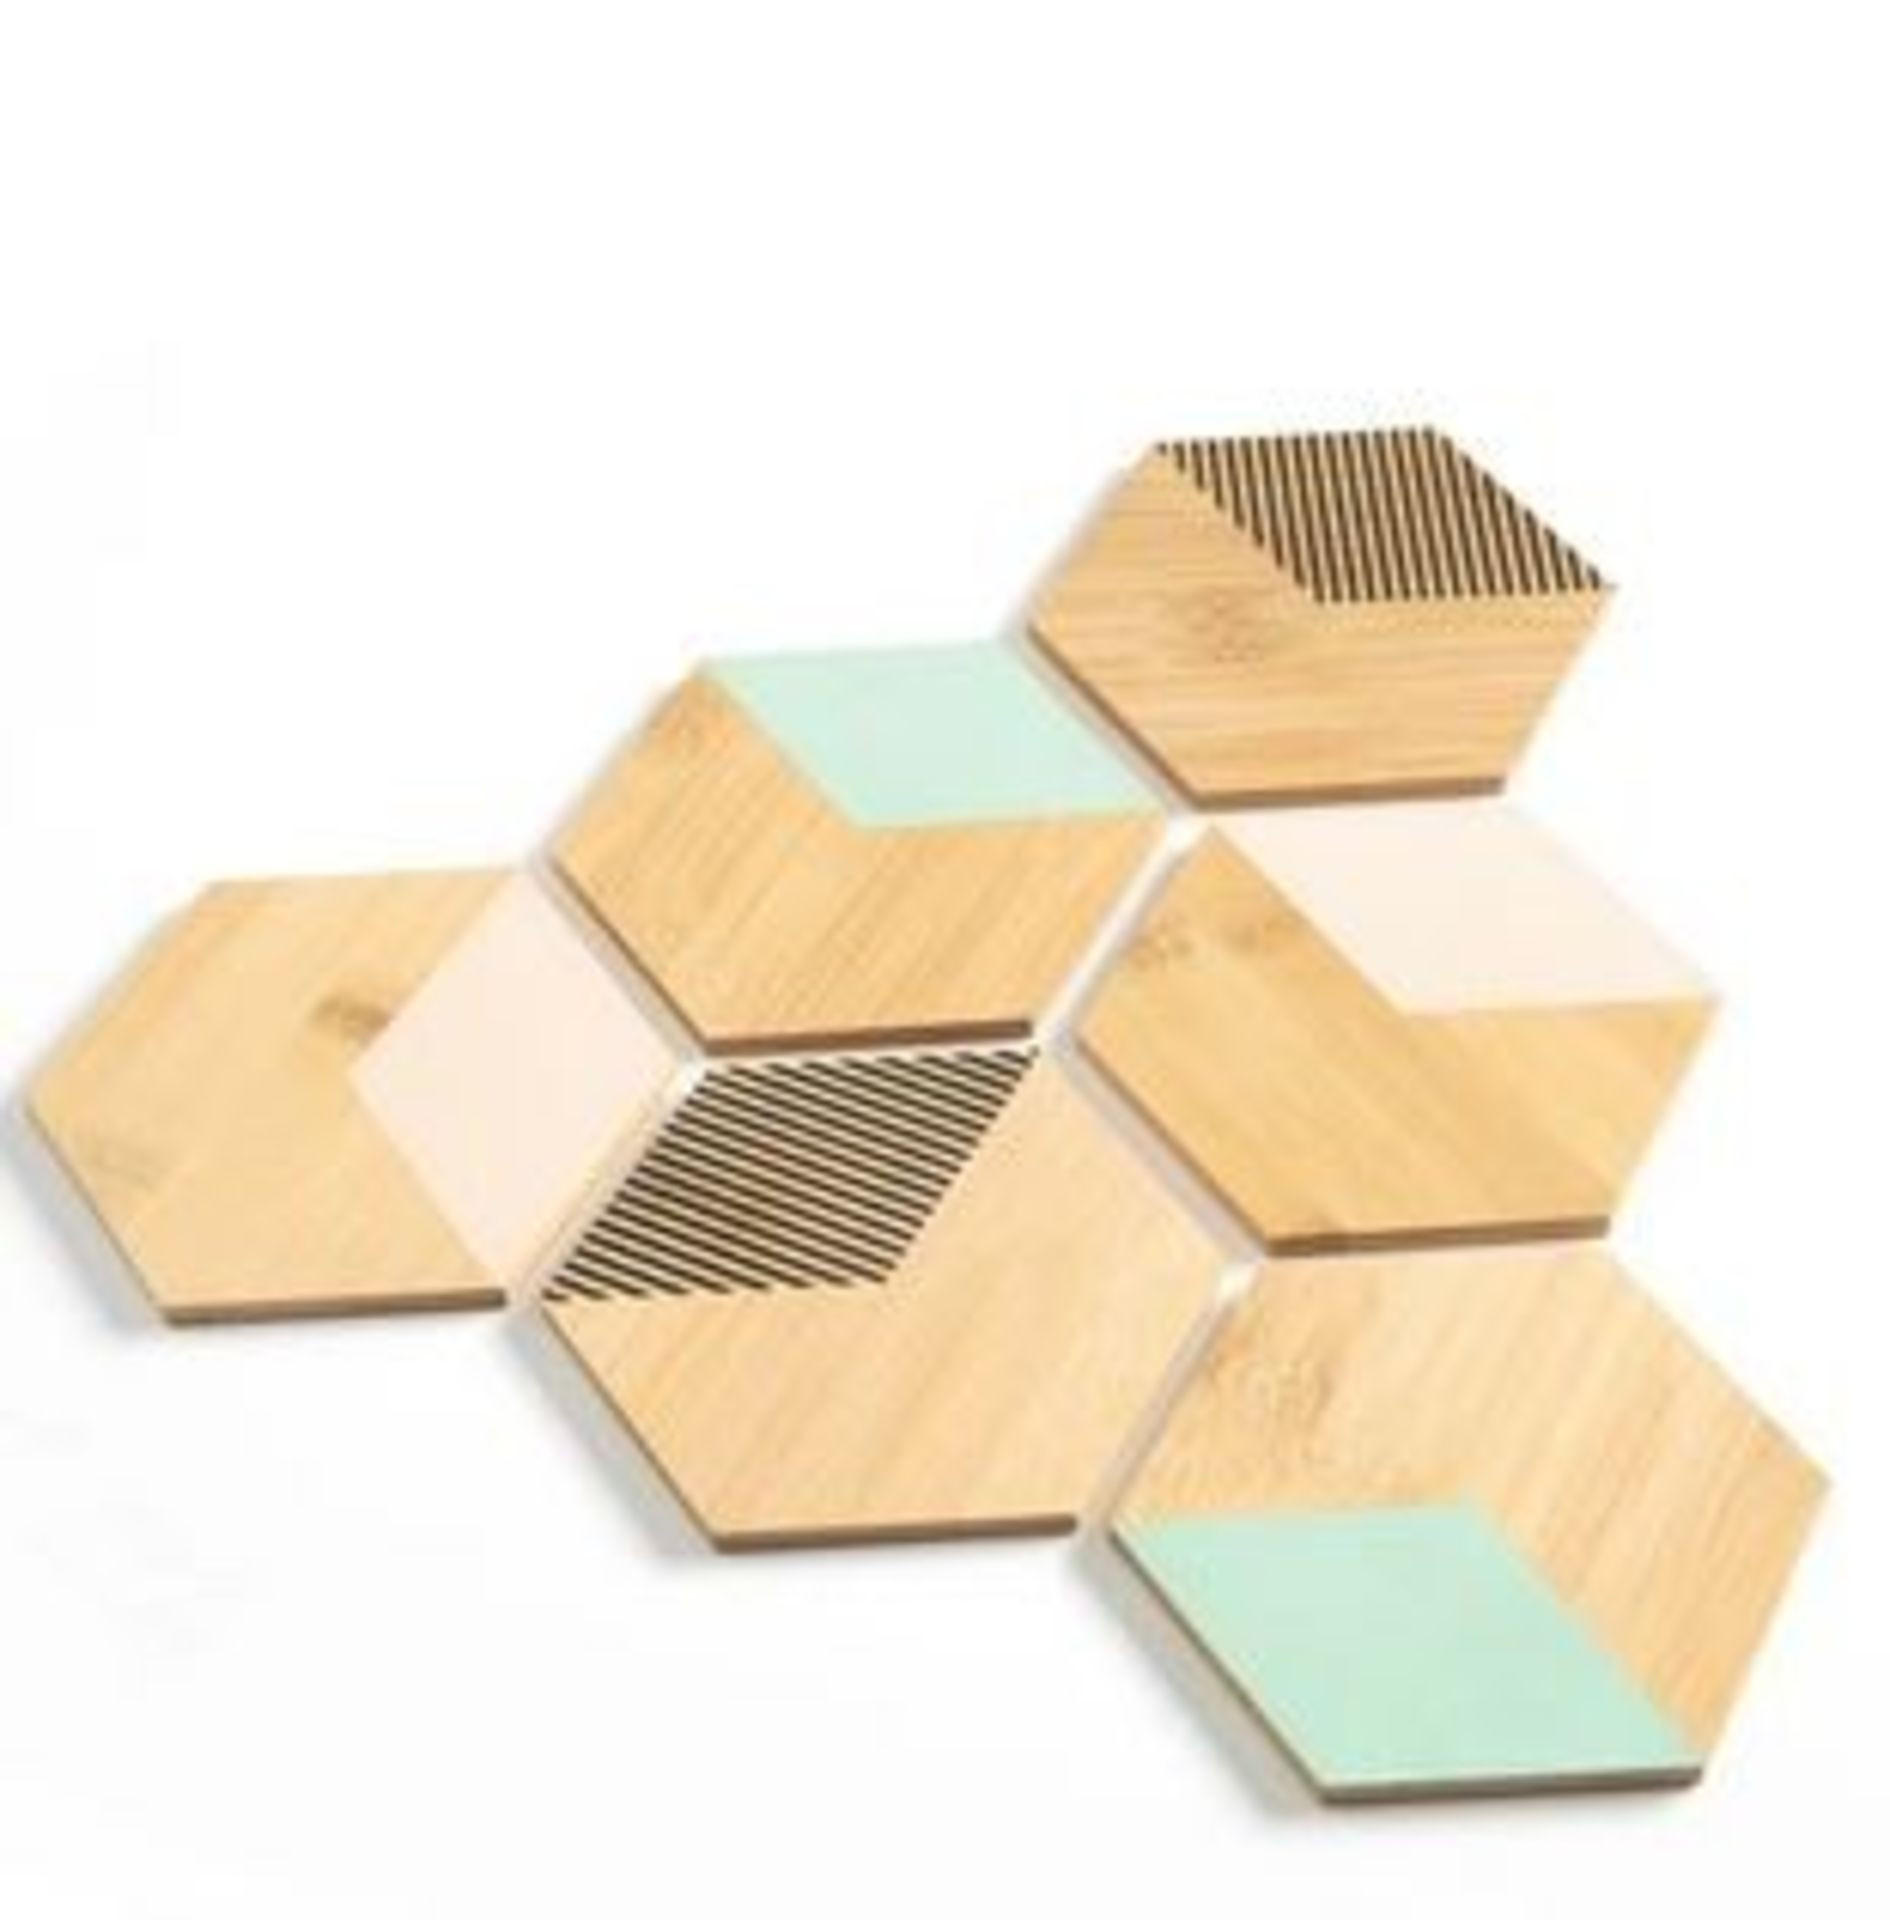 1 AS NEW BOXED LA REDOUTE SET OF 6 OGOMI COASTERS